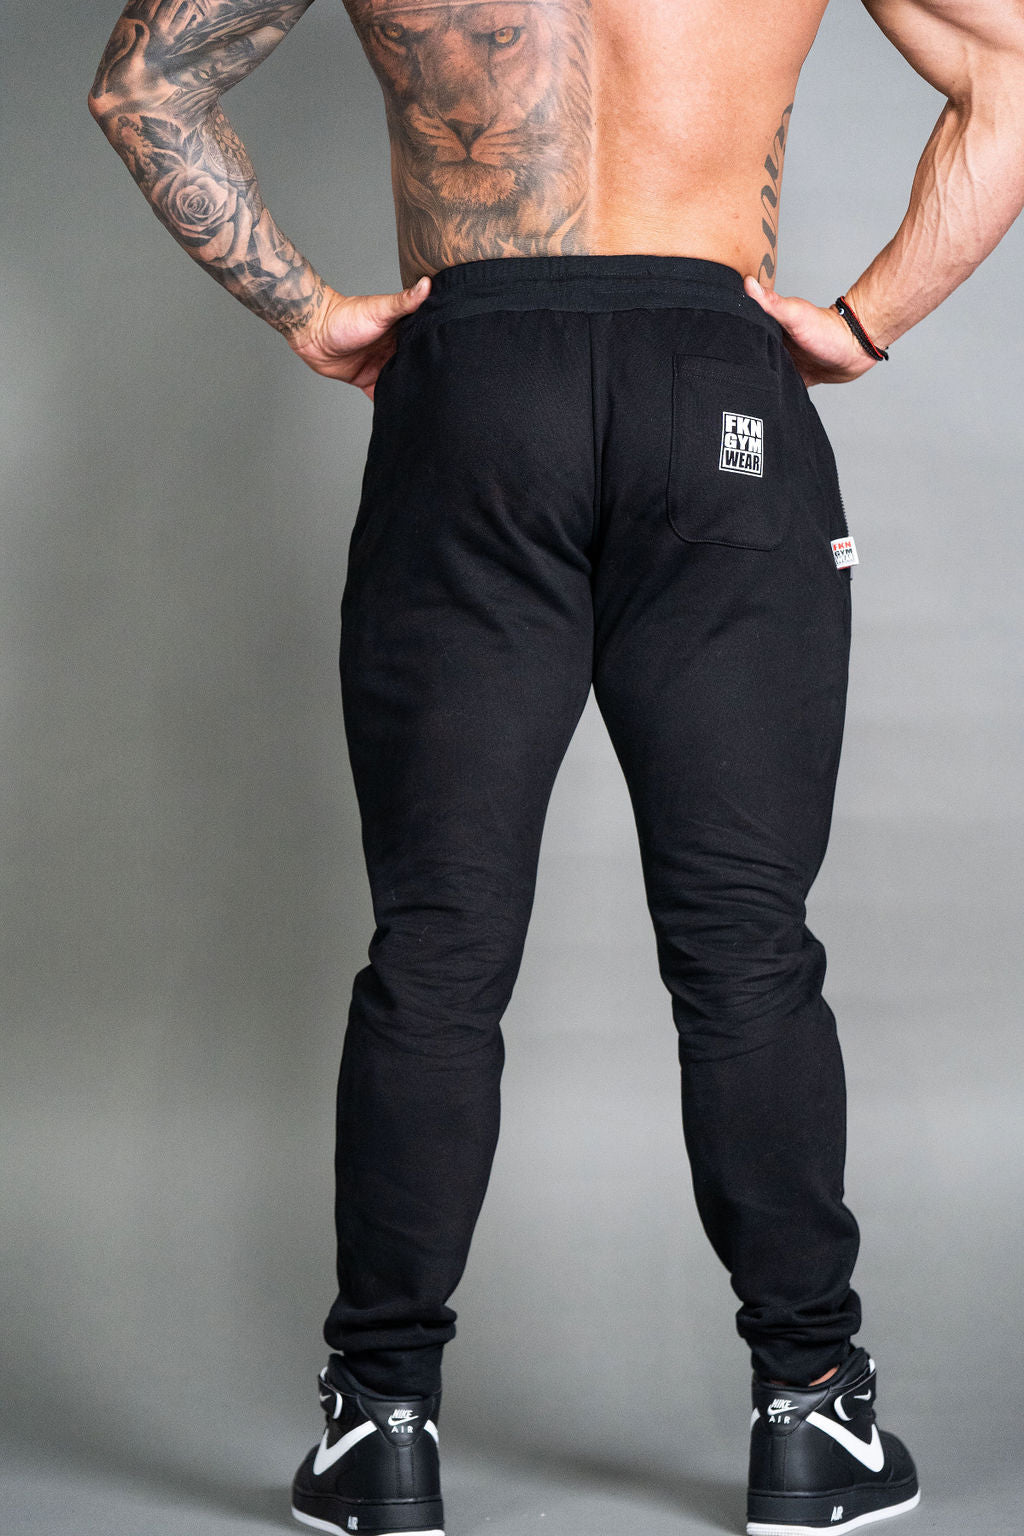 Attractive Track Pant, Gym Track Pant For Men, Gym Wear